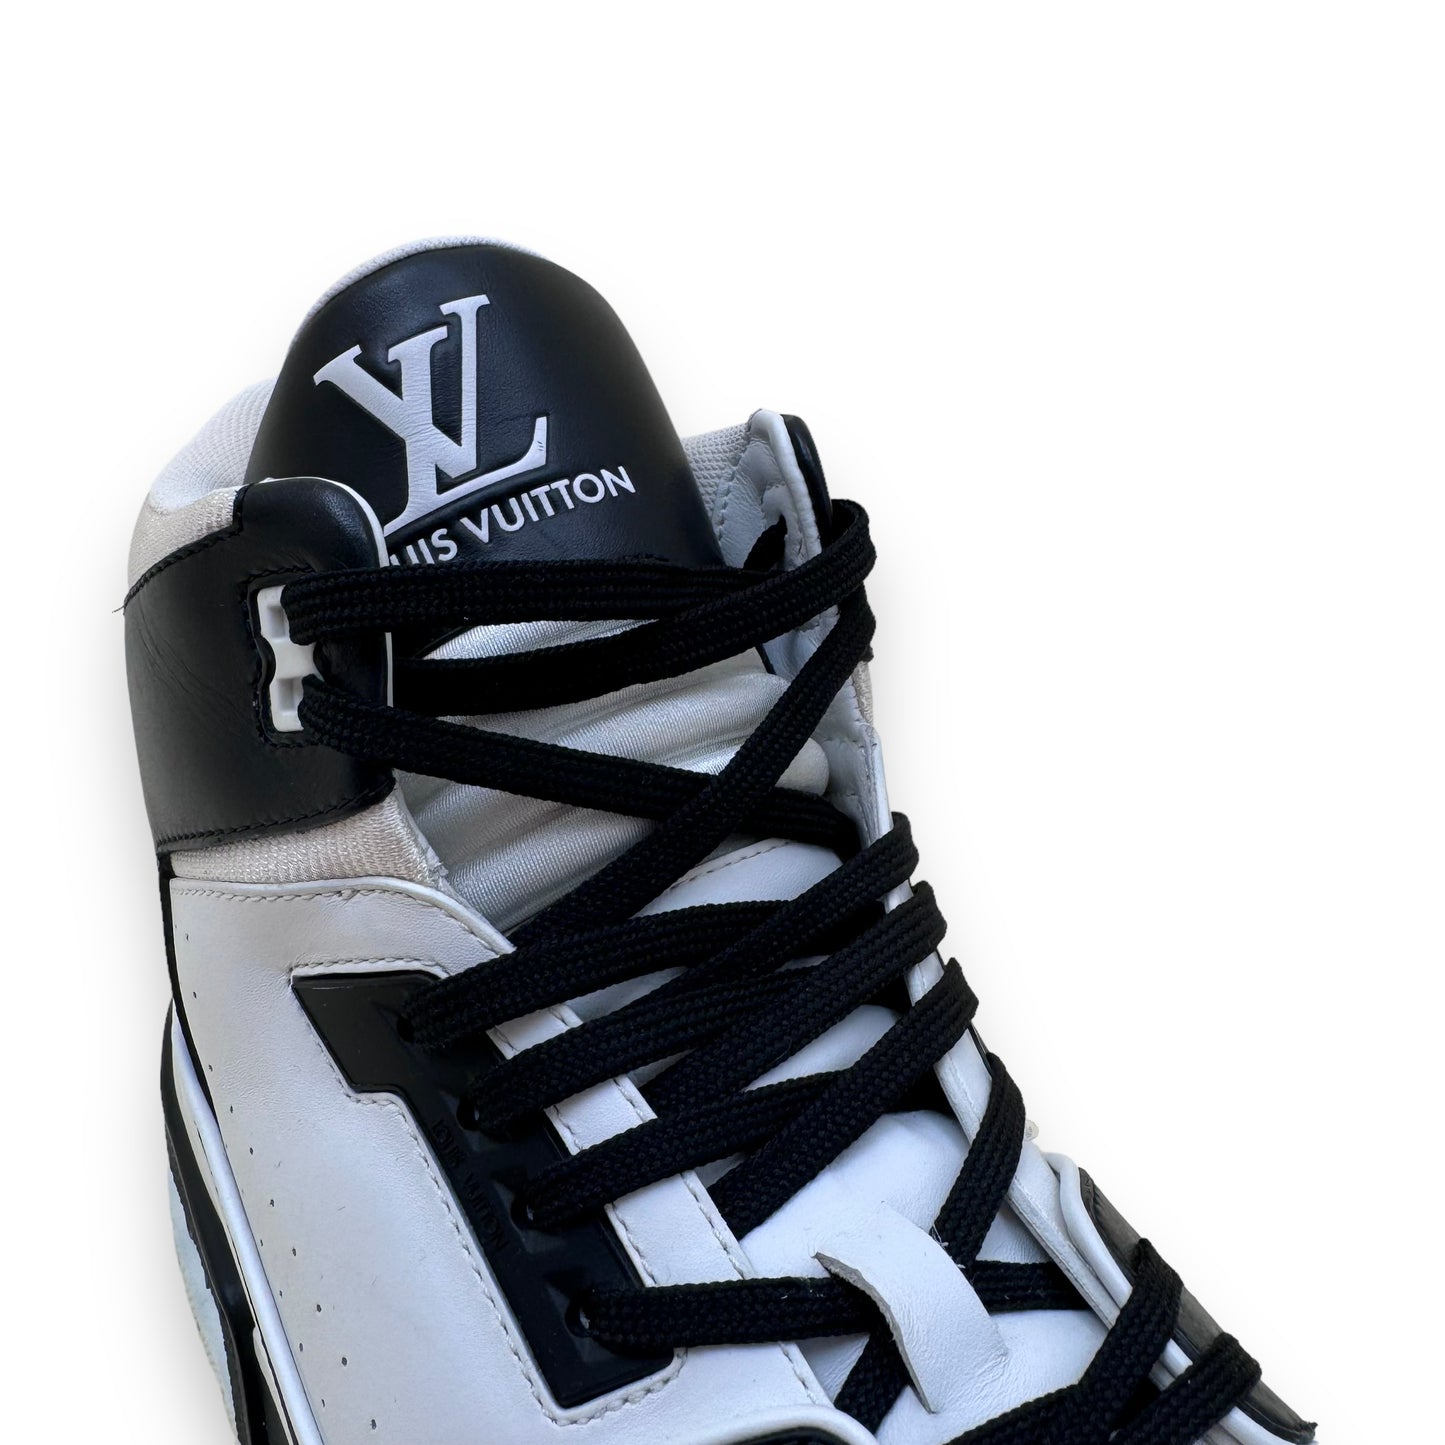 LOUIS VUITTON HIGH-TOP LEATHER SIGNATURE SNEAKER BLACK / WHITE UK11